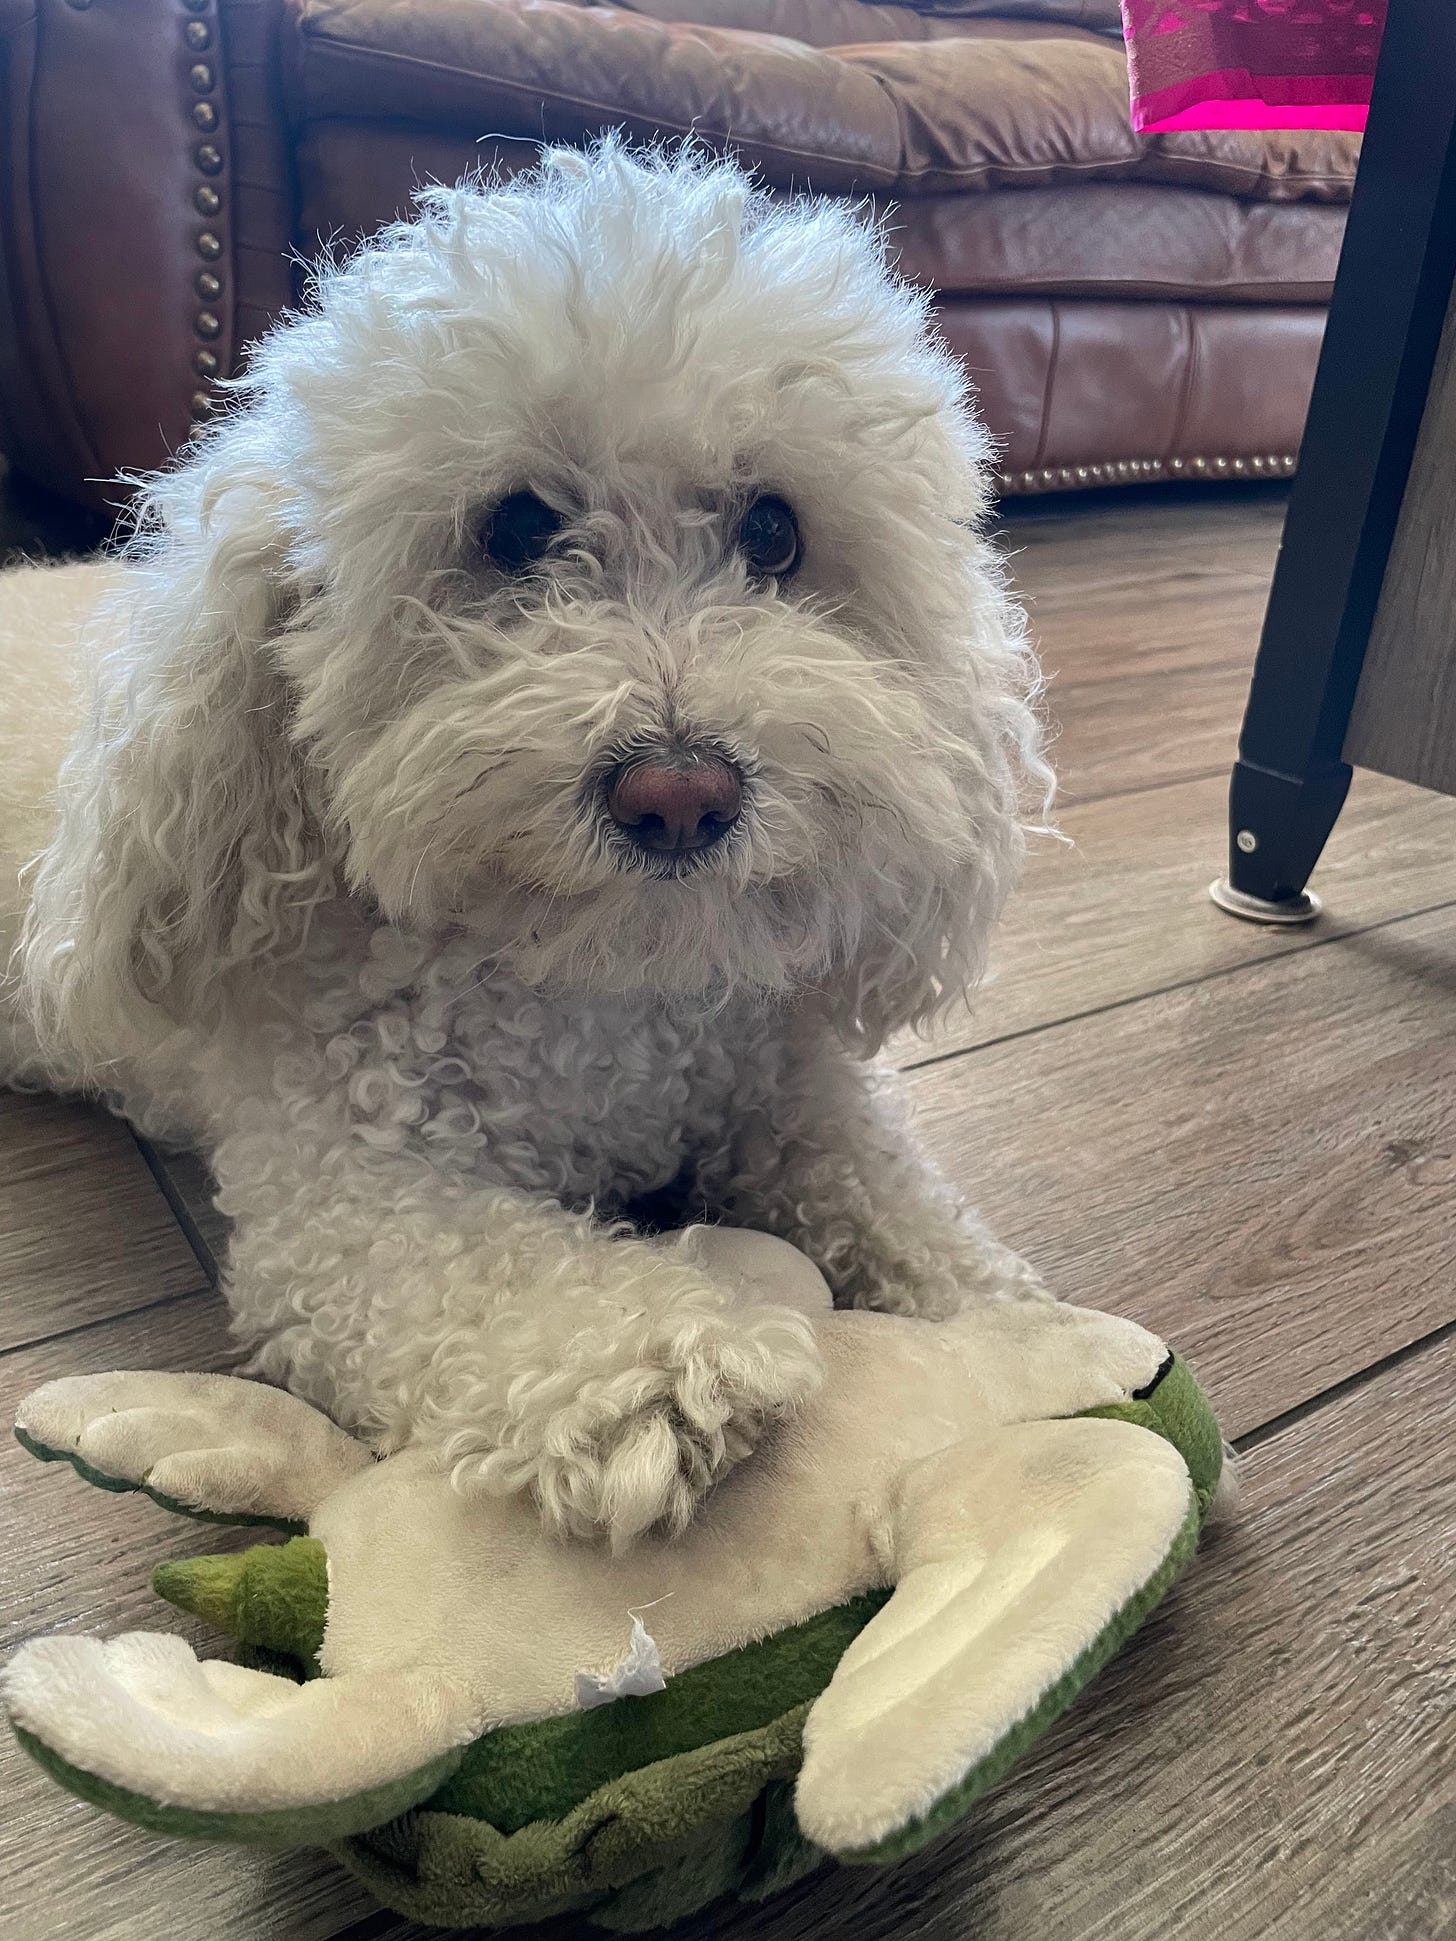 A fluffy white dog lies on a wooden floor and looks into a camera. His right paw is atop an overturned toy turtle. Behind the dog is a brown couch.